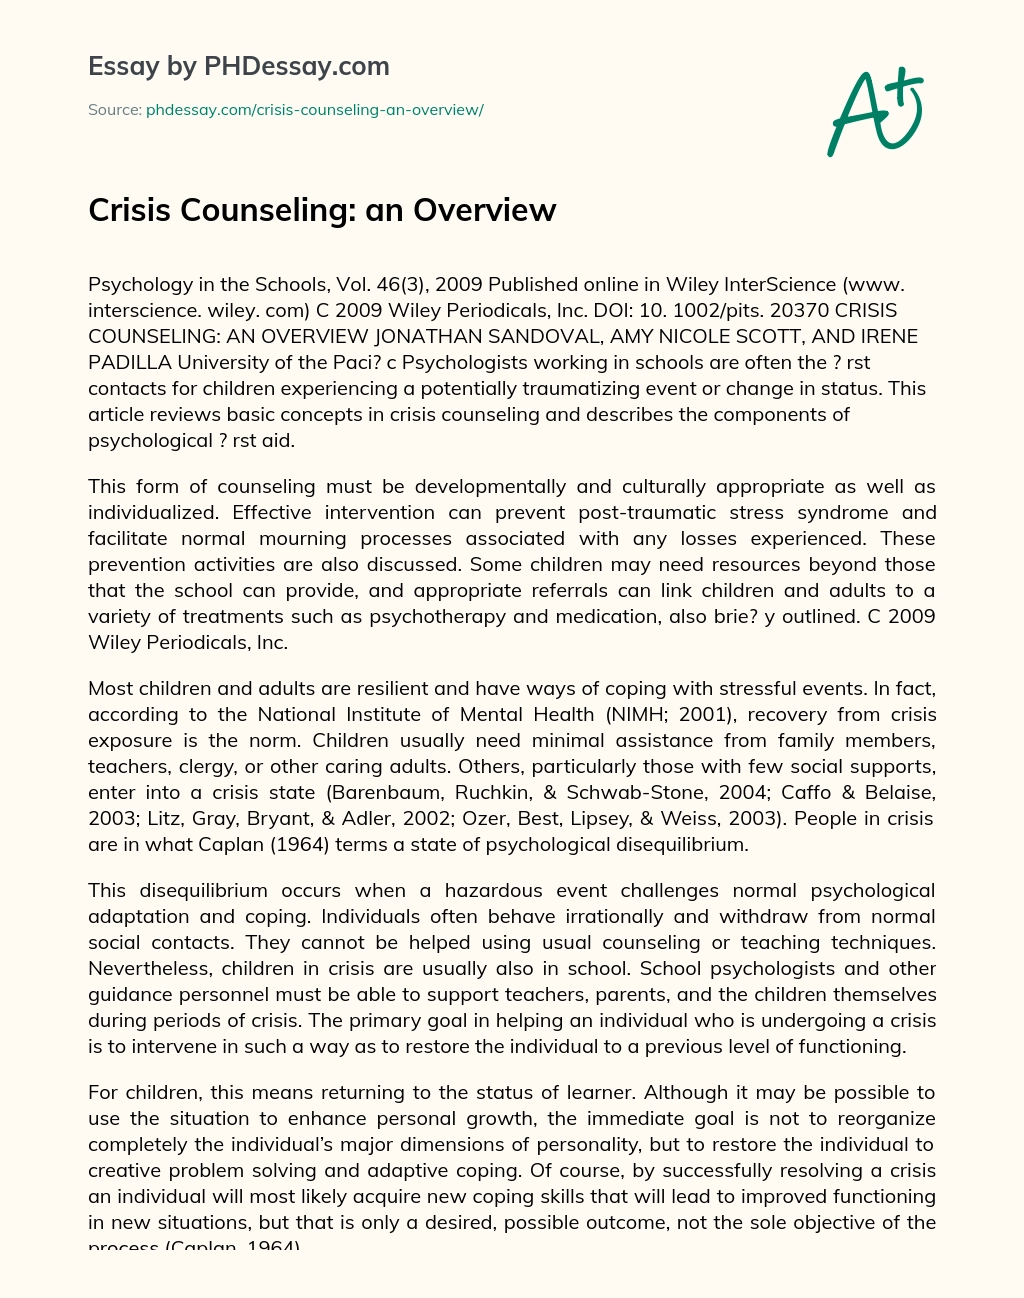 Crisis Counseling: an Overview essay